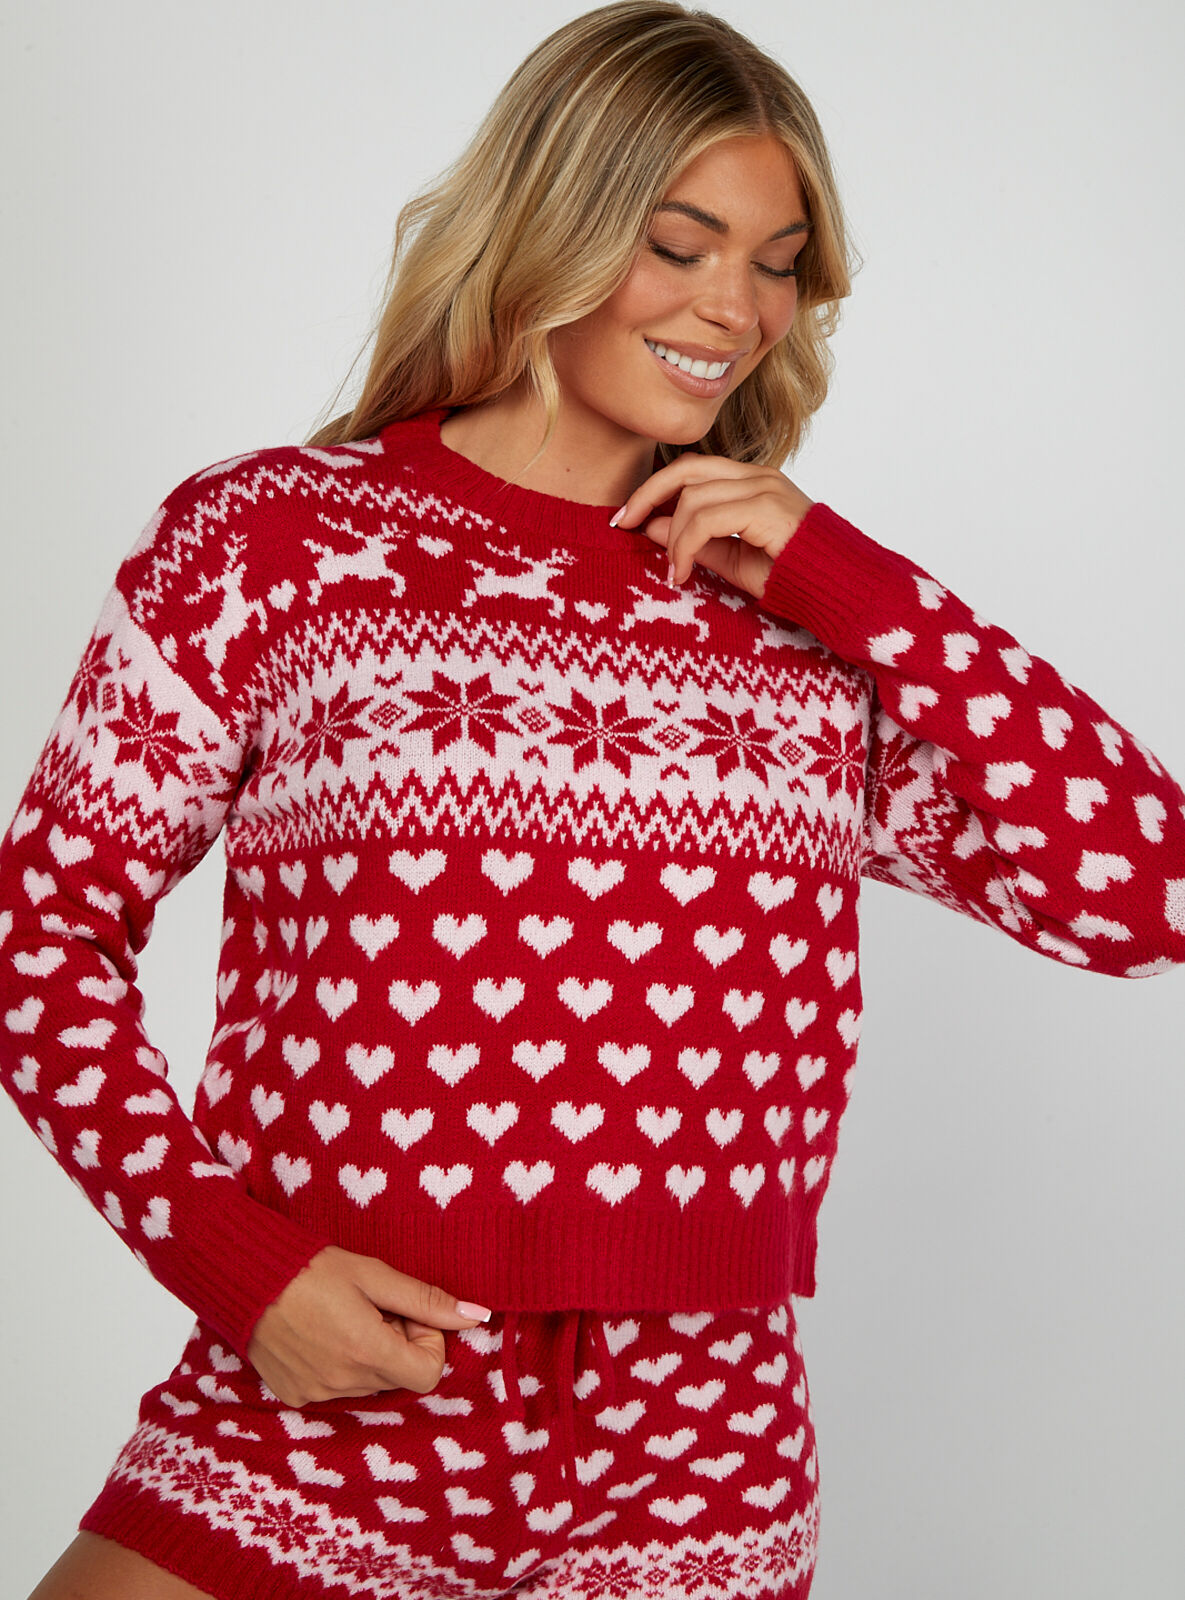 Boux Avenue Fairisle knitted jumper - Red Mix - 14